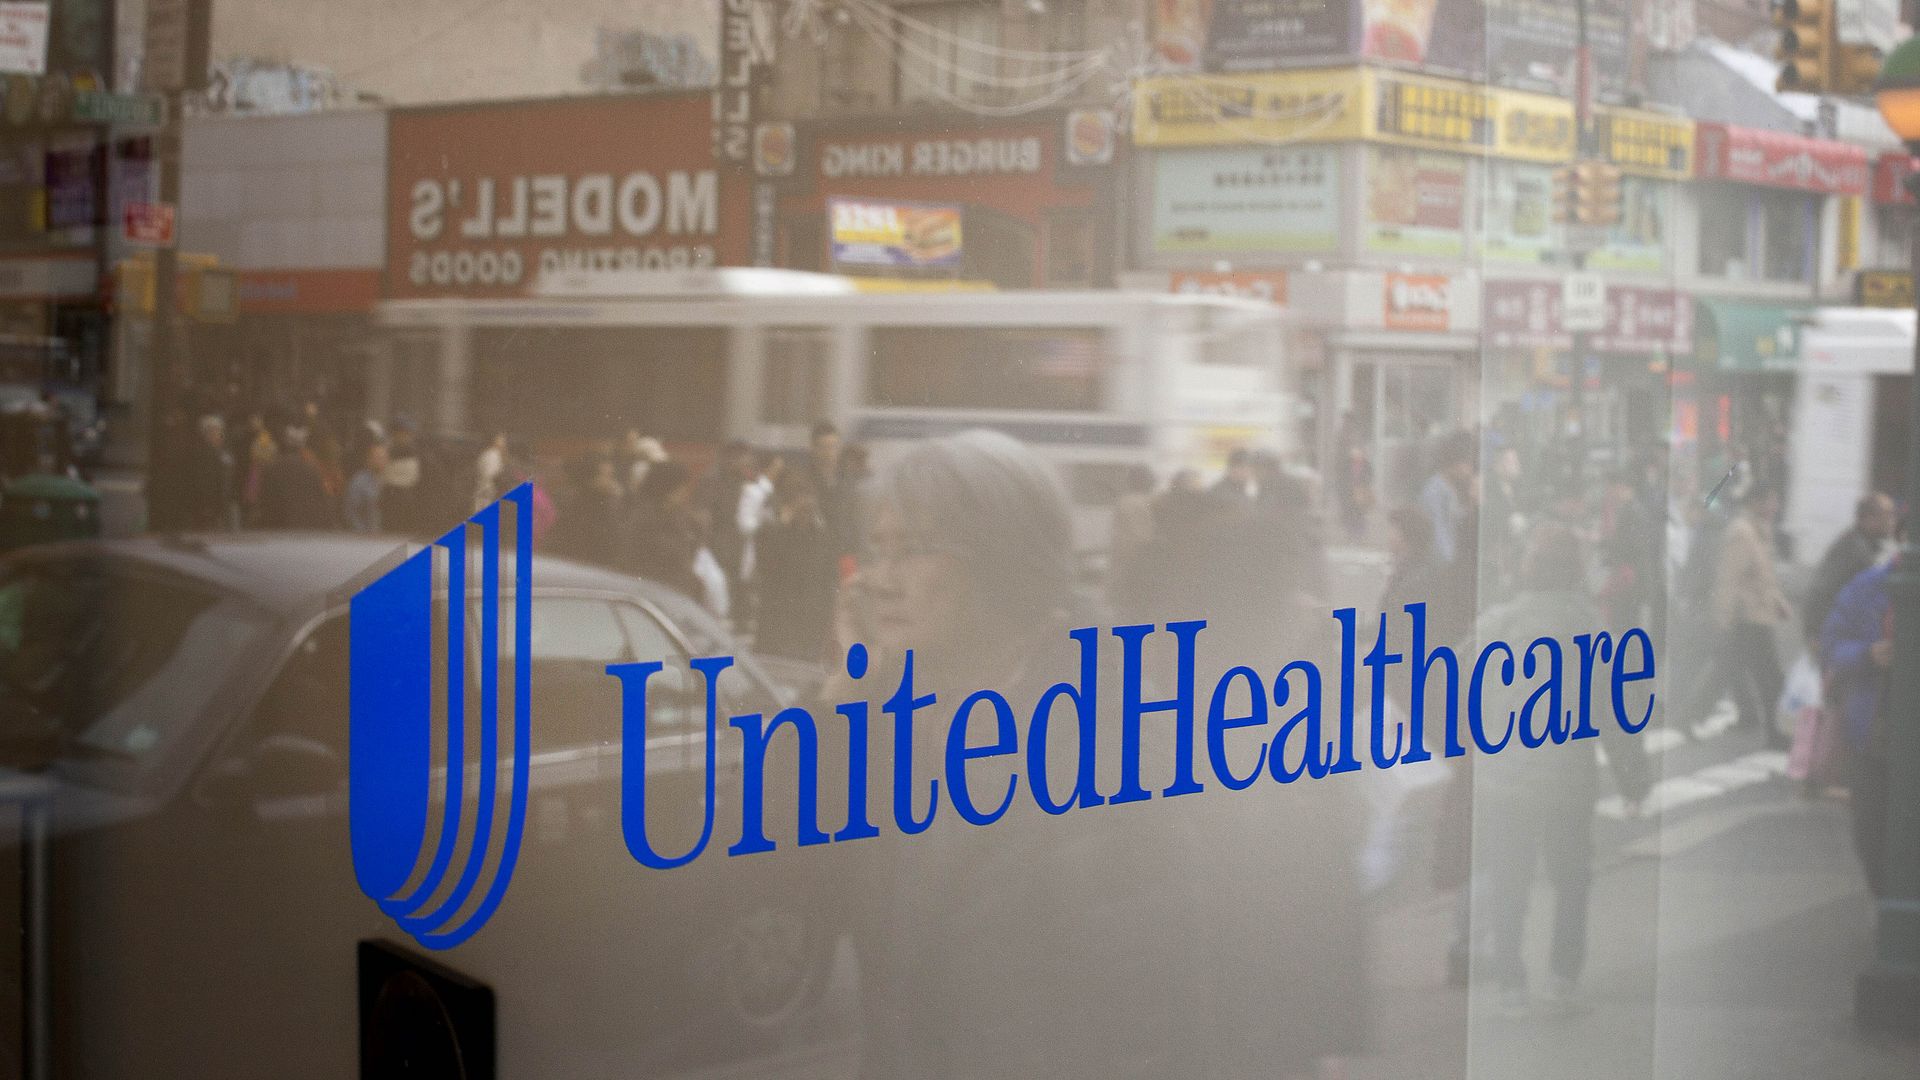 UnitedHealthcare signage outside of a store in New York.